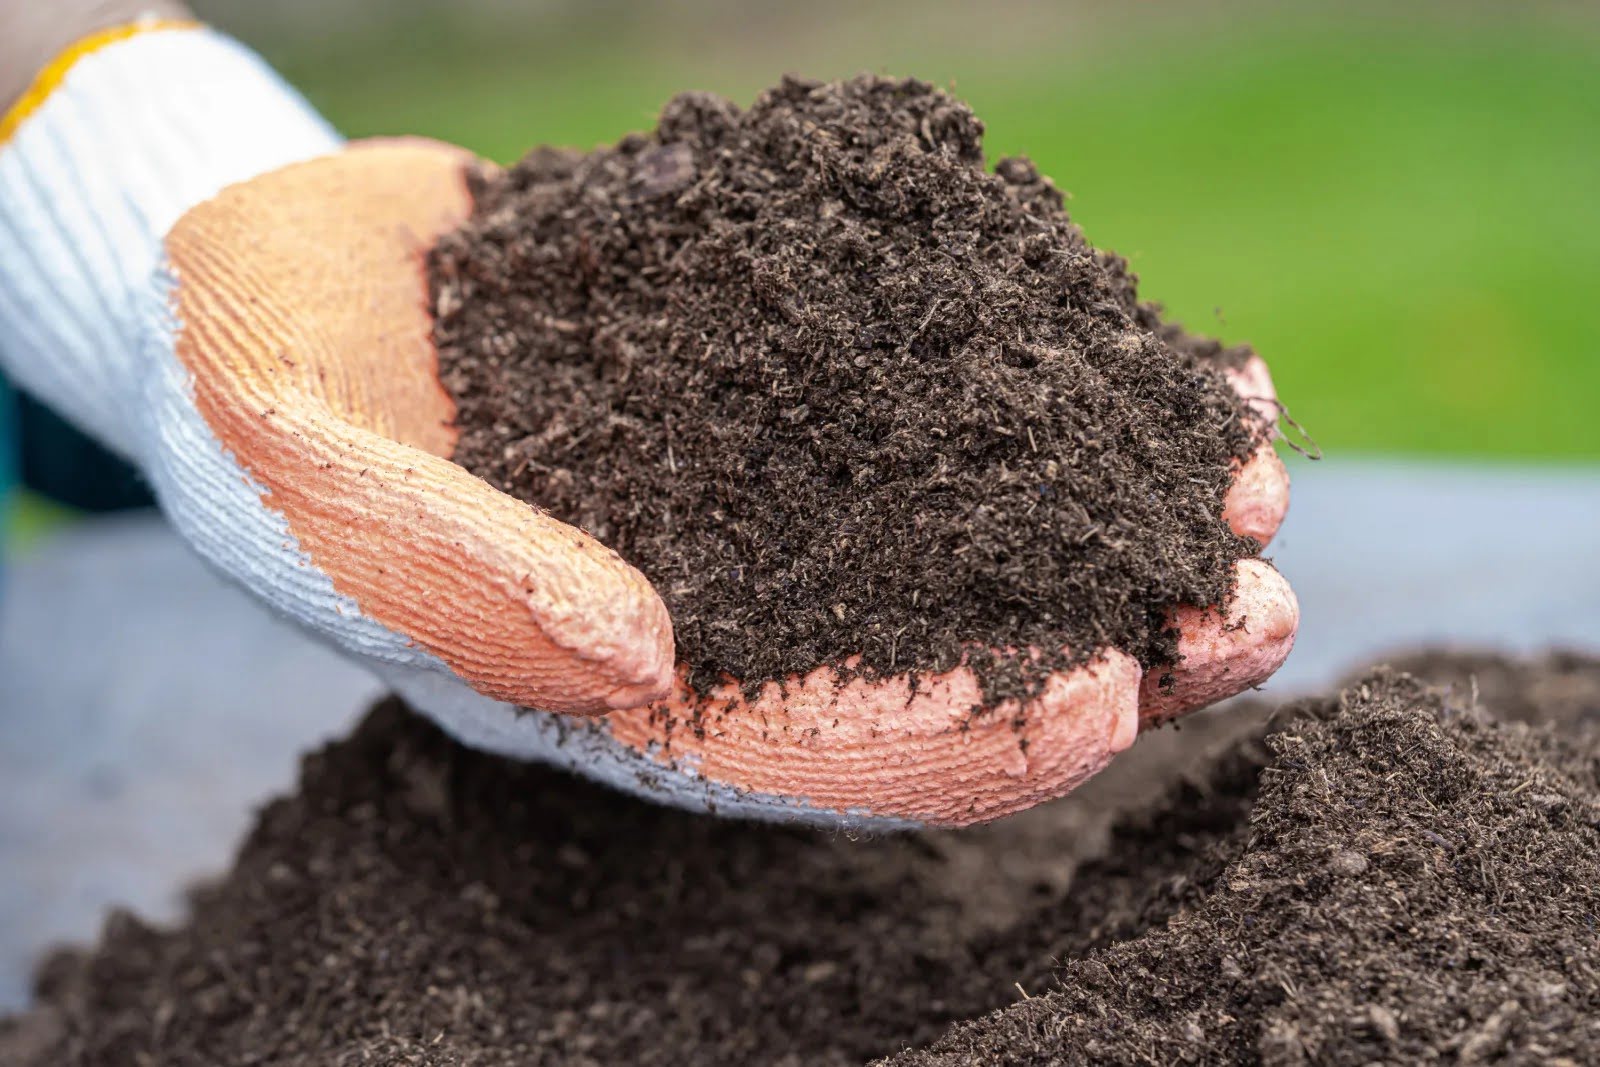 How To Spread Peat Moss Over Grass Seed